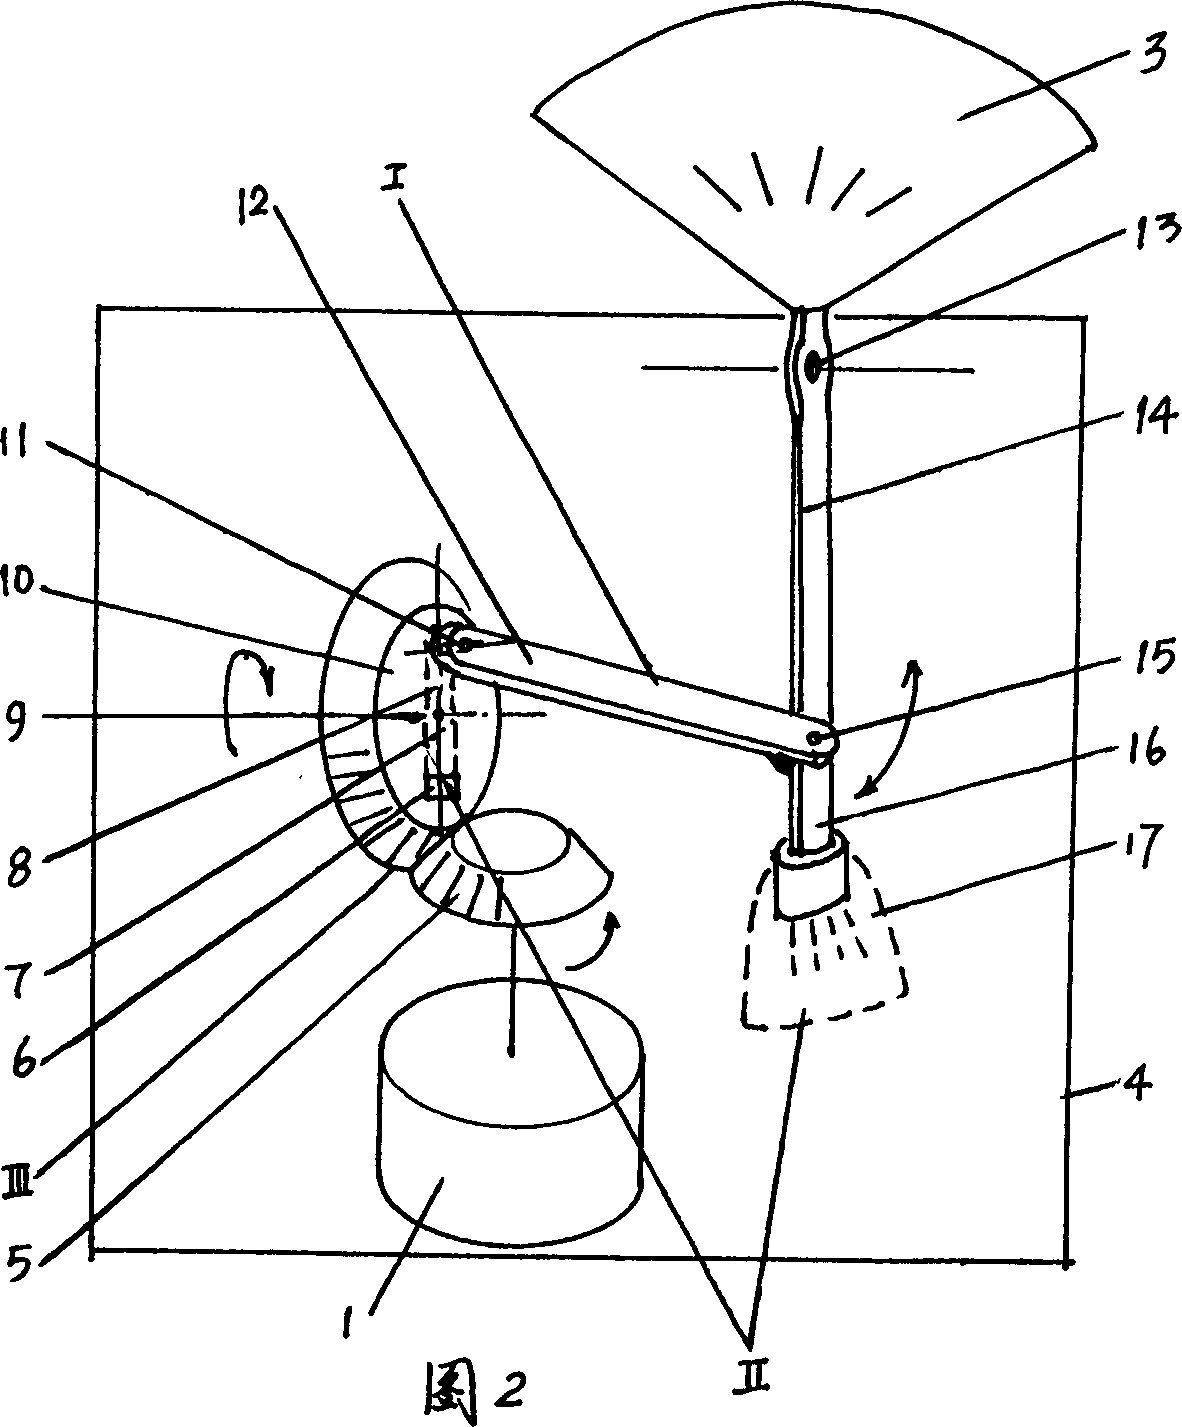 Oscillating fan without vibration